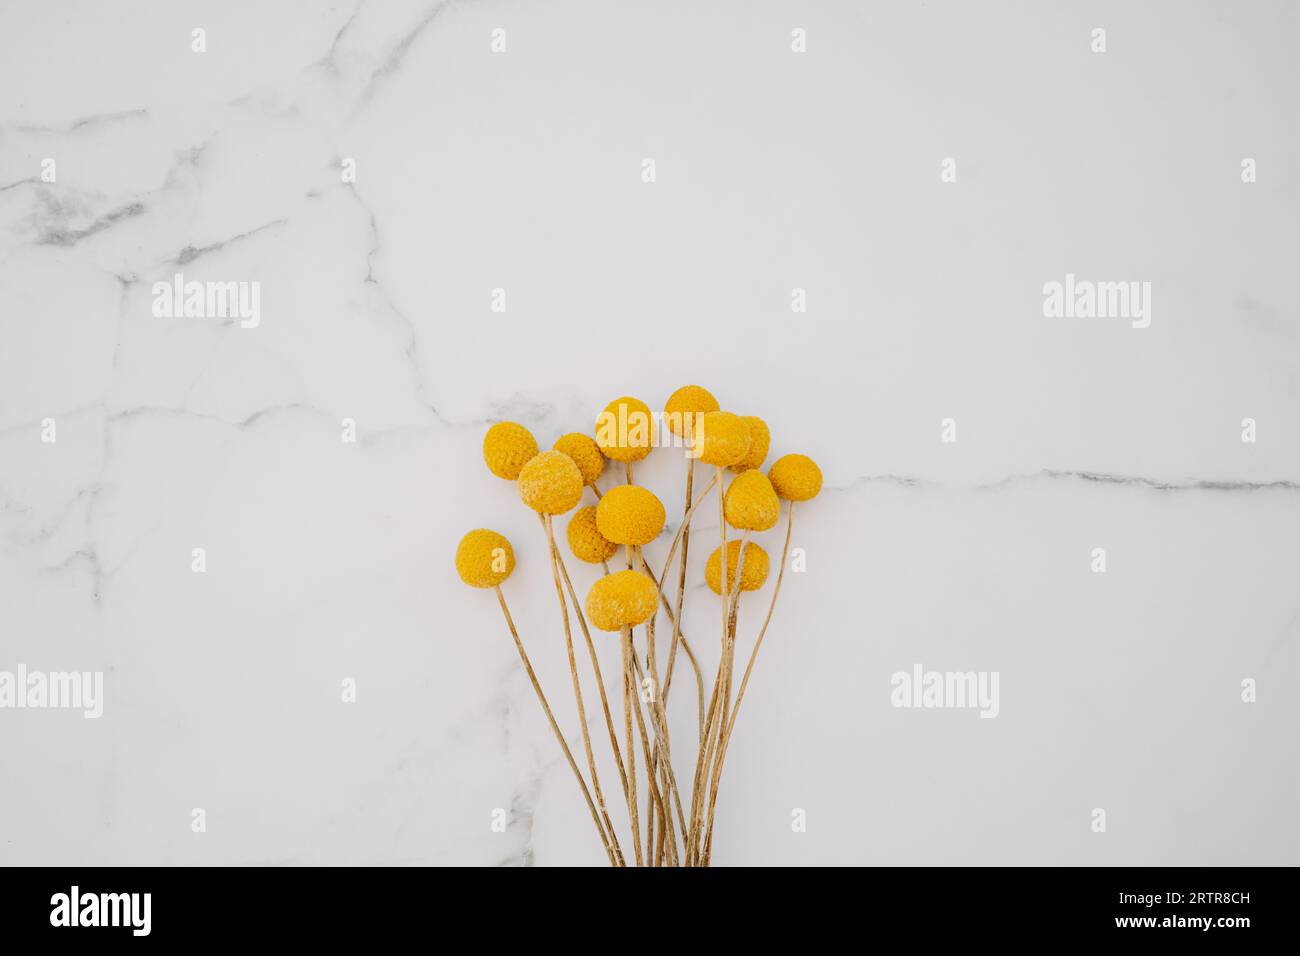 Bouquet of dried natural decorative yellow flowers Craspedia globosa on white marble background. Top view. Copy space. Flat lay Stock Photo